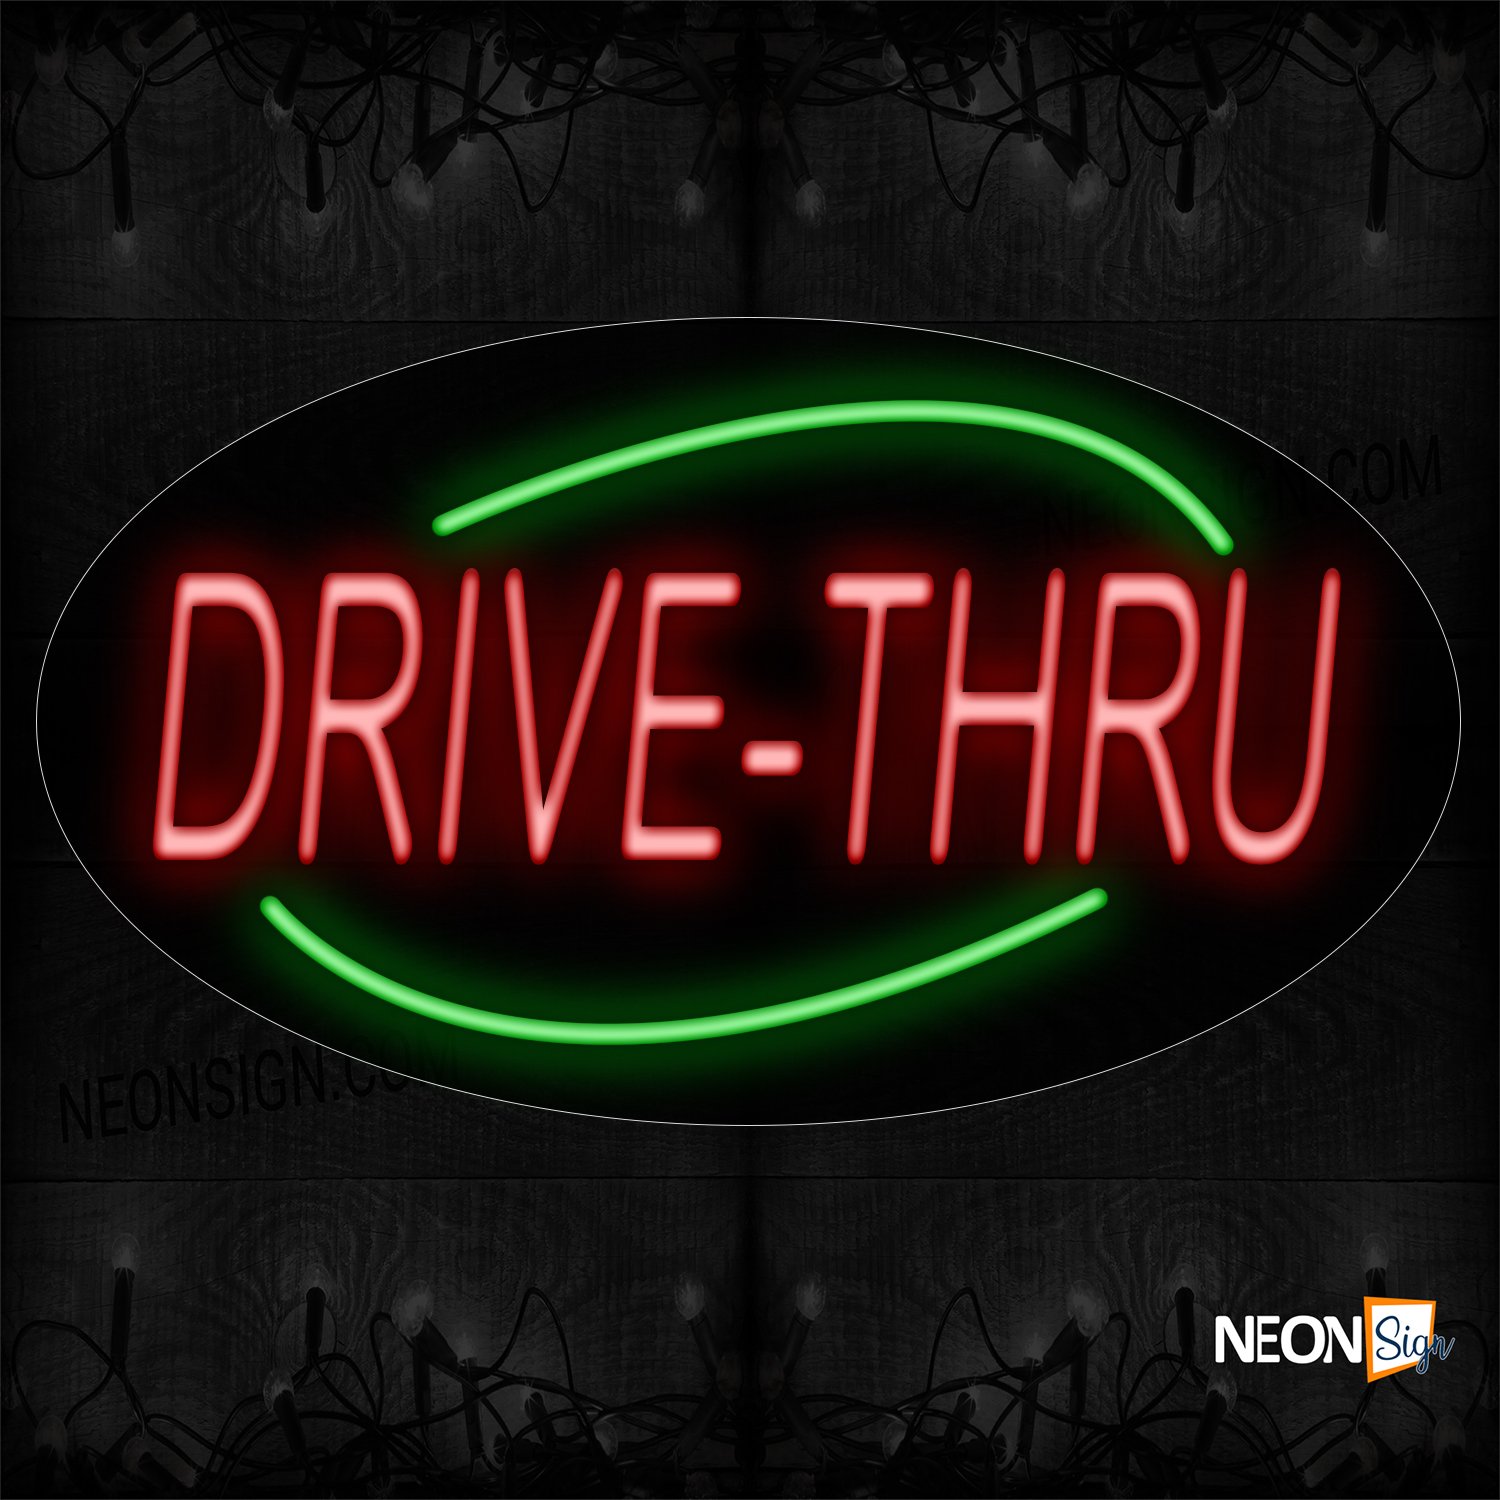 Image of 14037 Drive-Thru With Contoured black backing Neon Sign_17x30 Black Backing